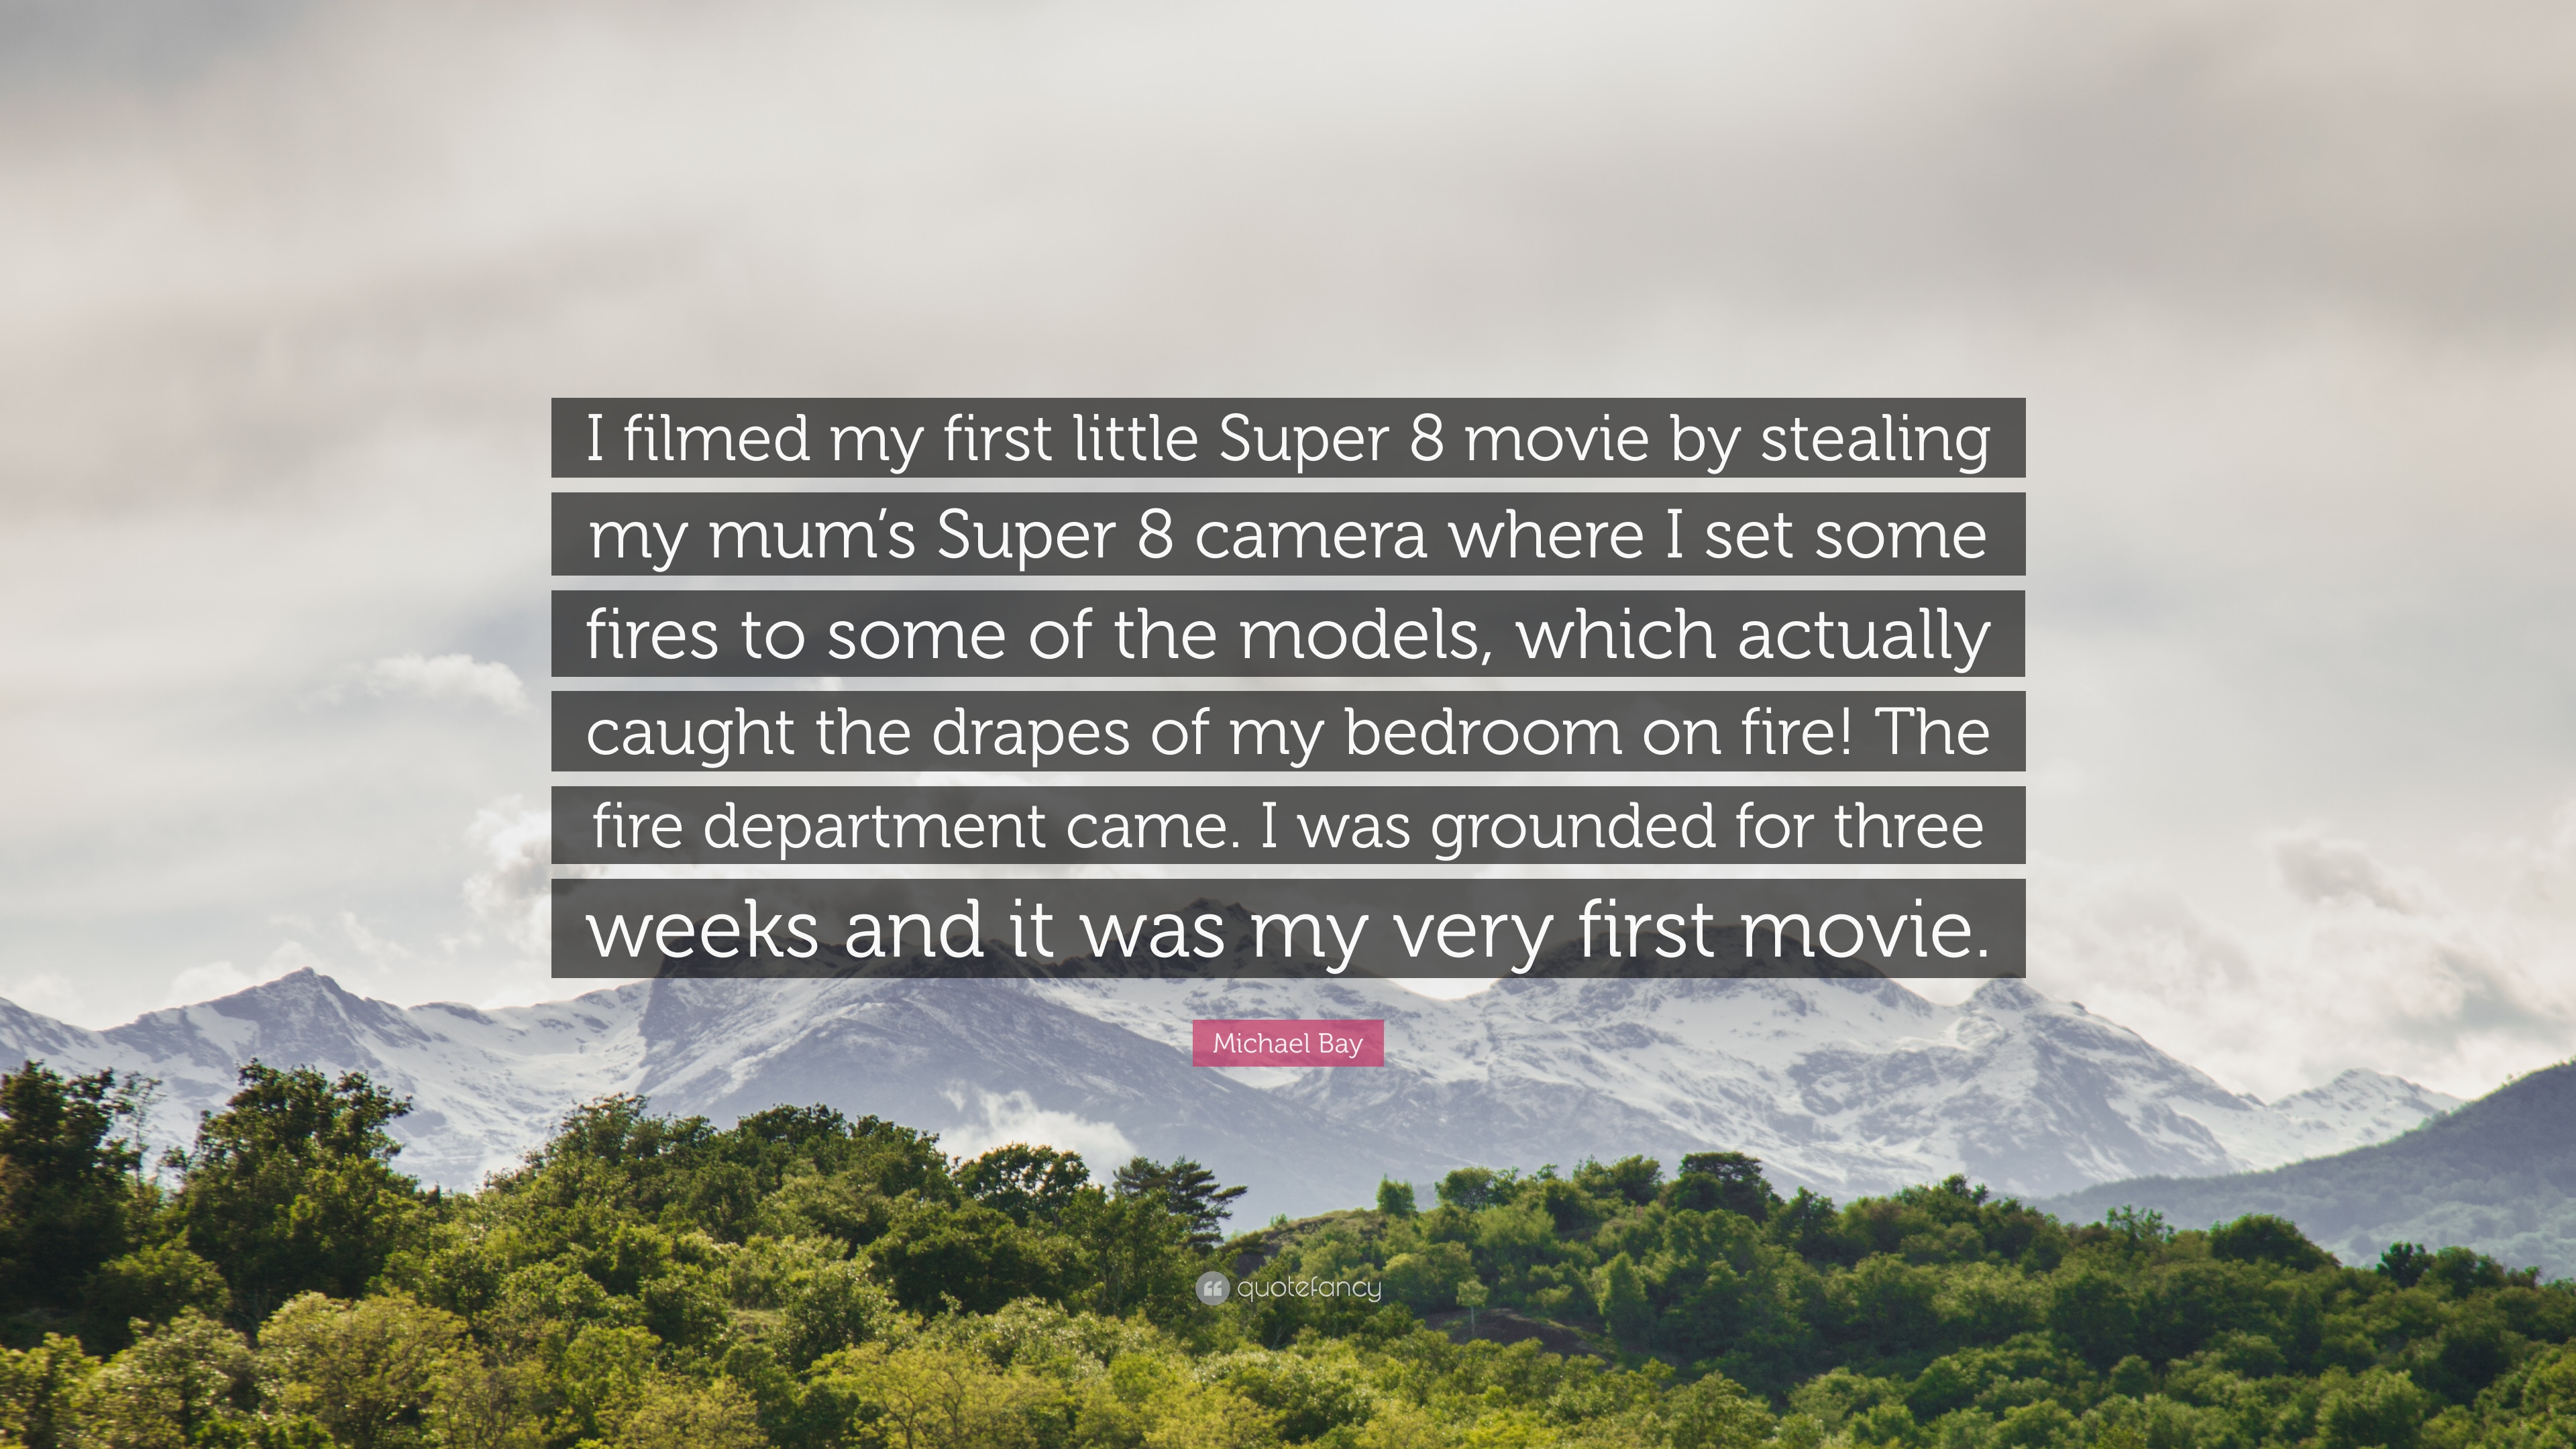 Michael Bay Quote: “I filmed my first little Super 8 movie